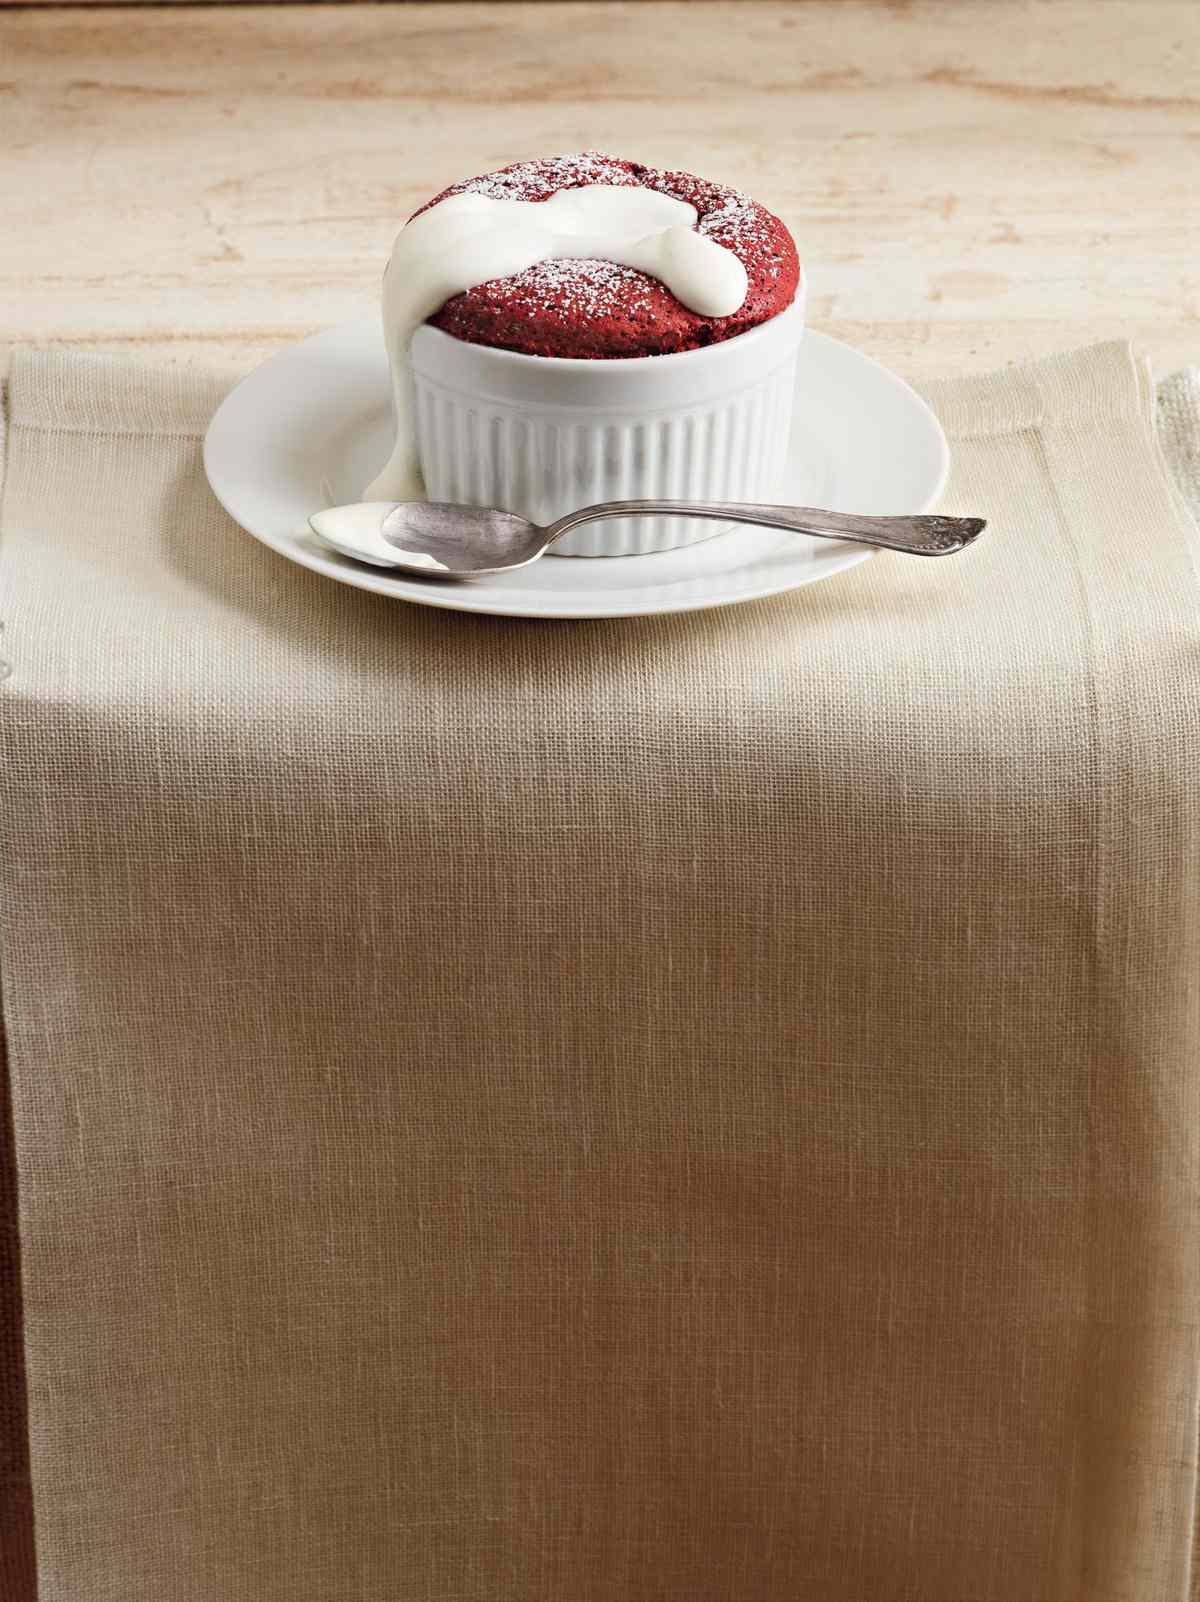 Red Velvet Soufflés with Whipped Sour Cream